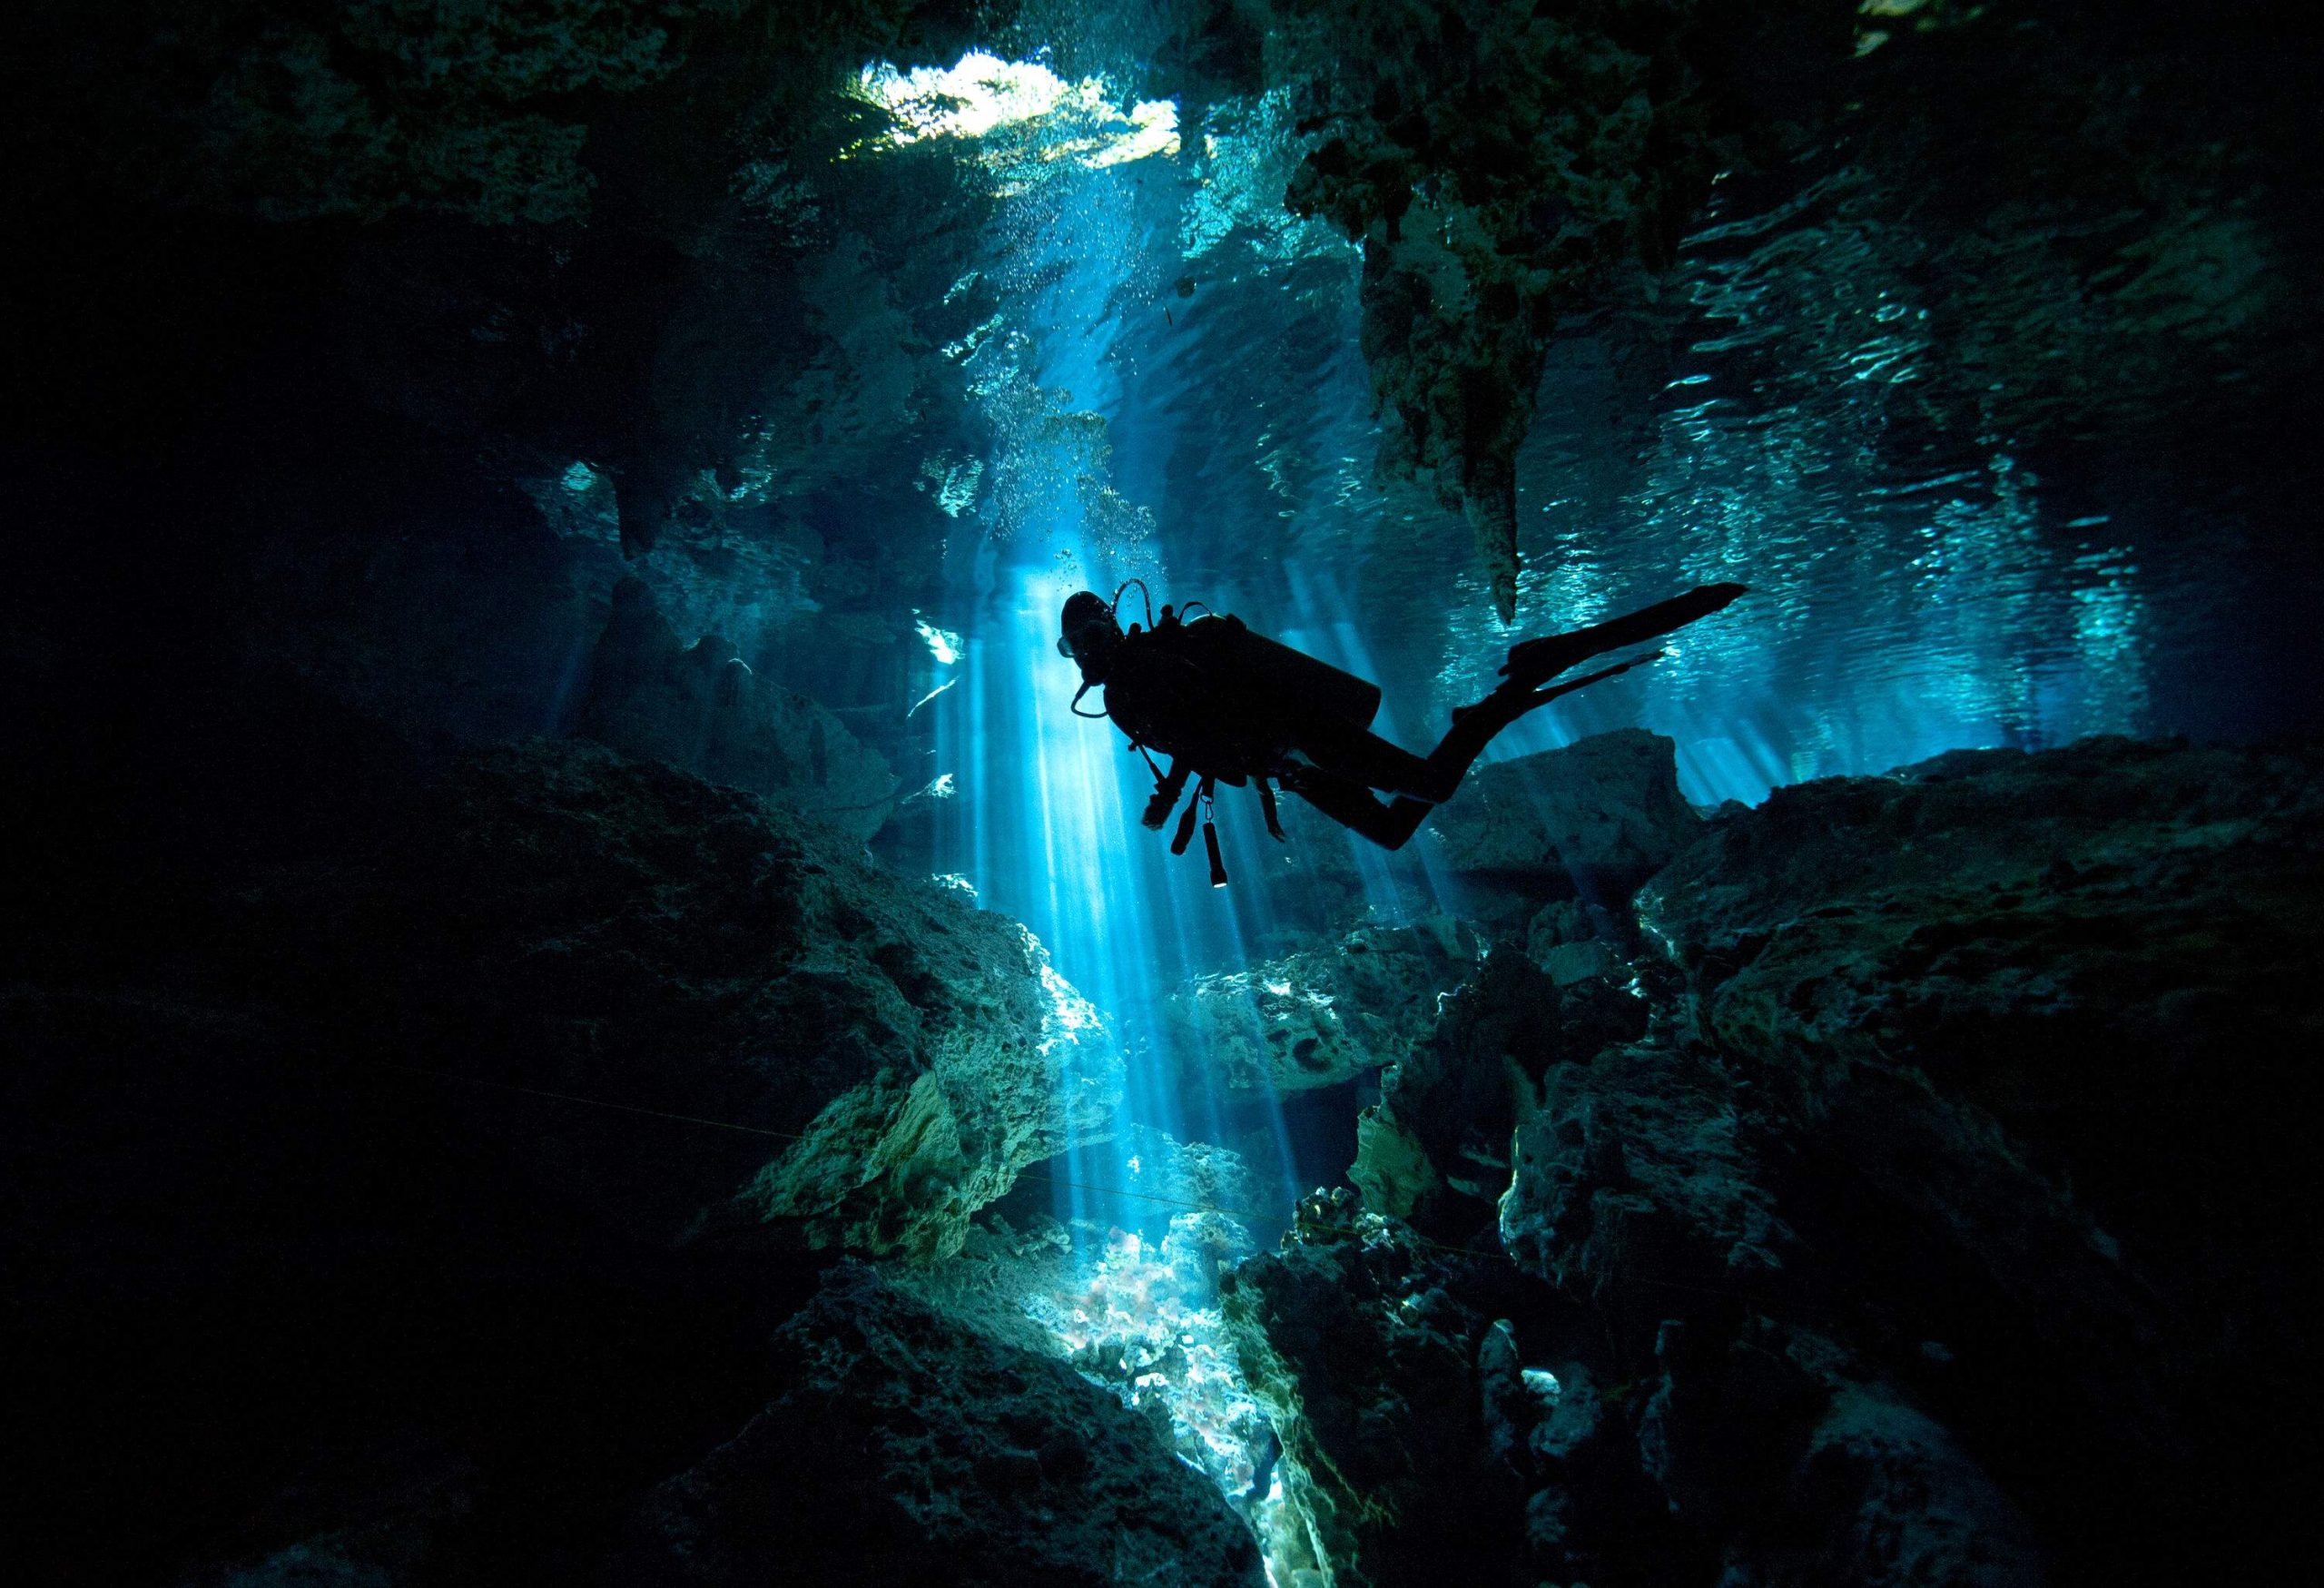 Silhouette of a scuba diver exploring an underwater cave with light streaks from small openings.